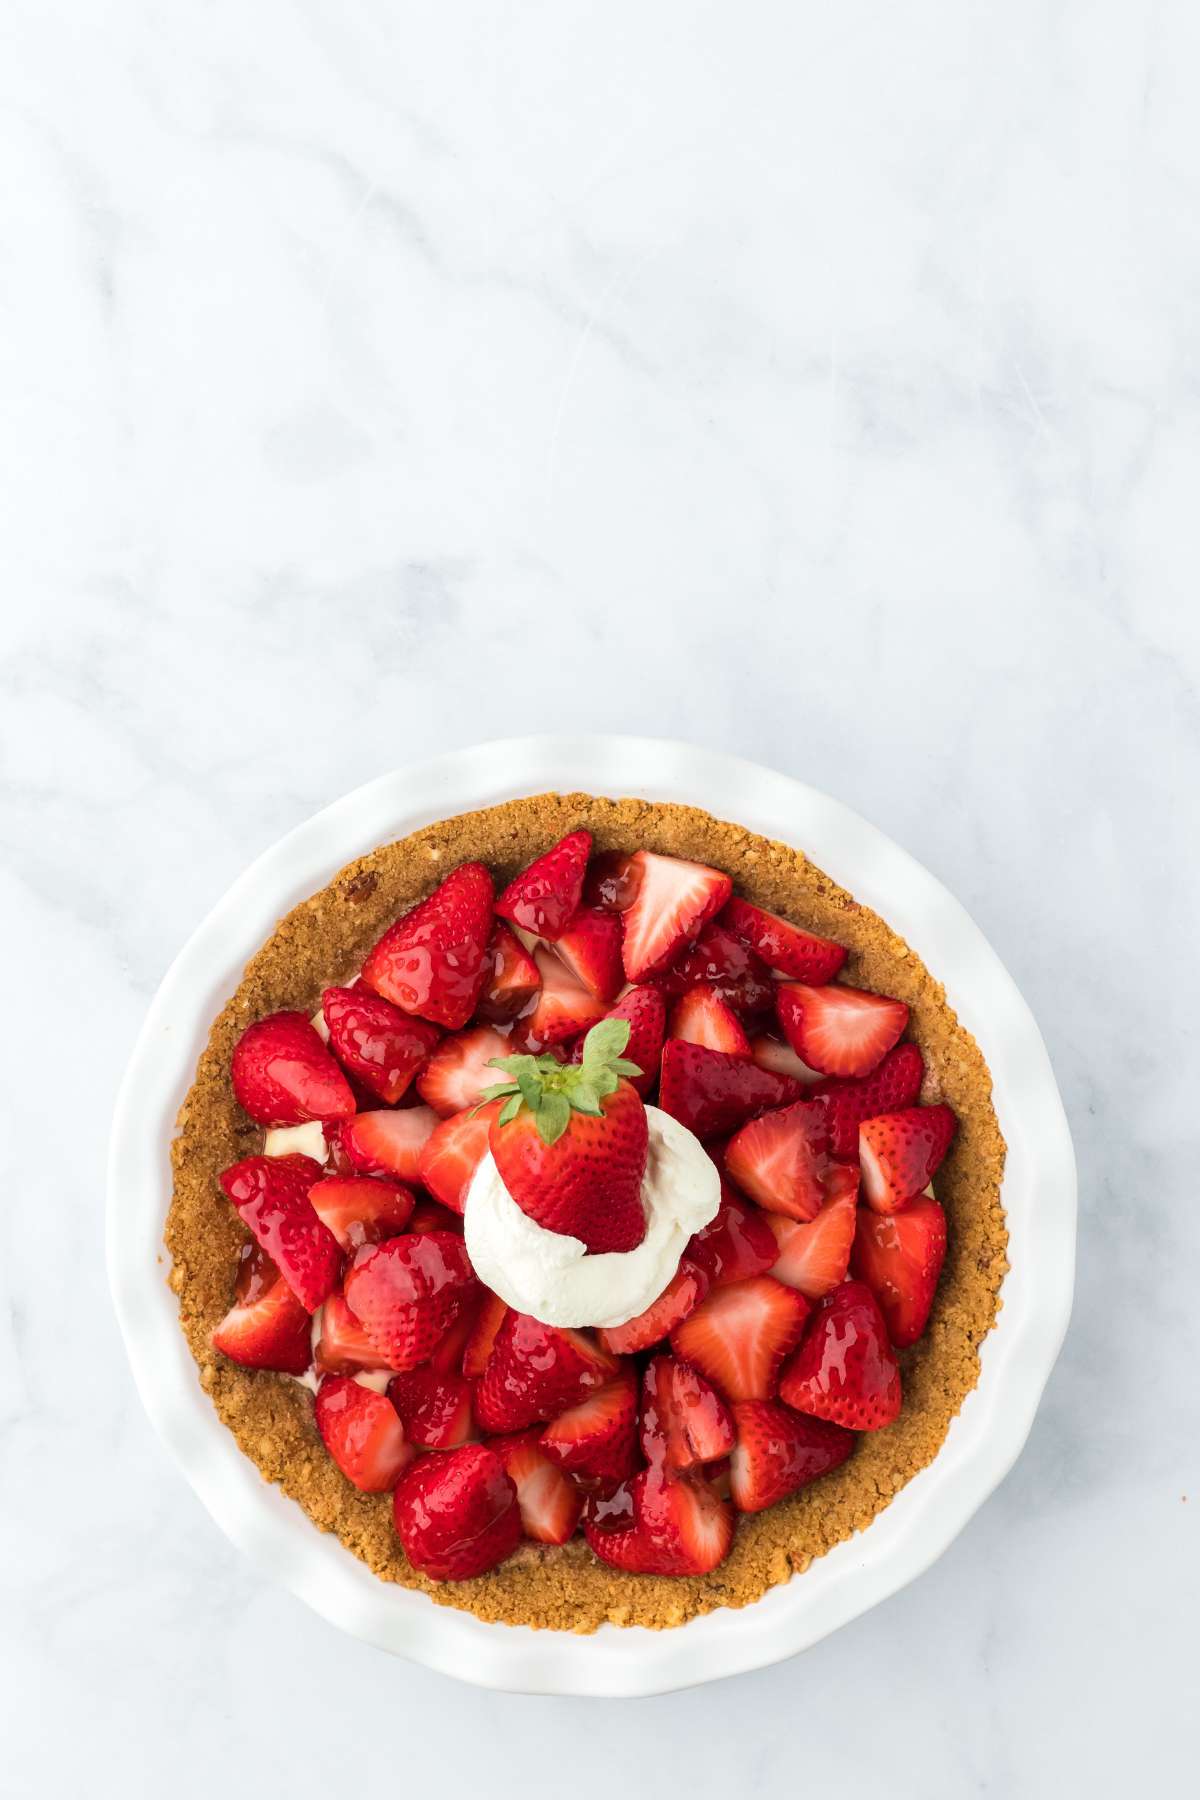 Strawberry tart finished and topped with whipped cream.